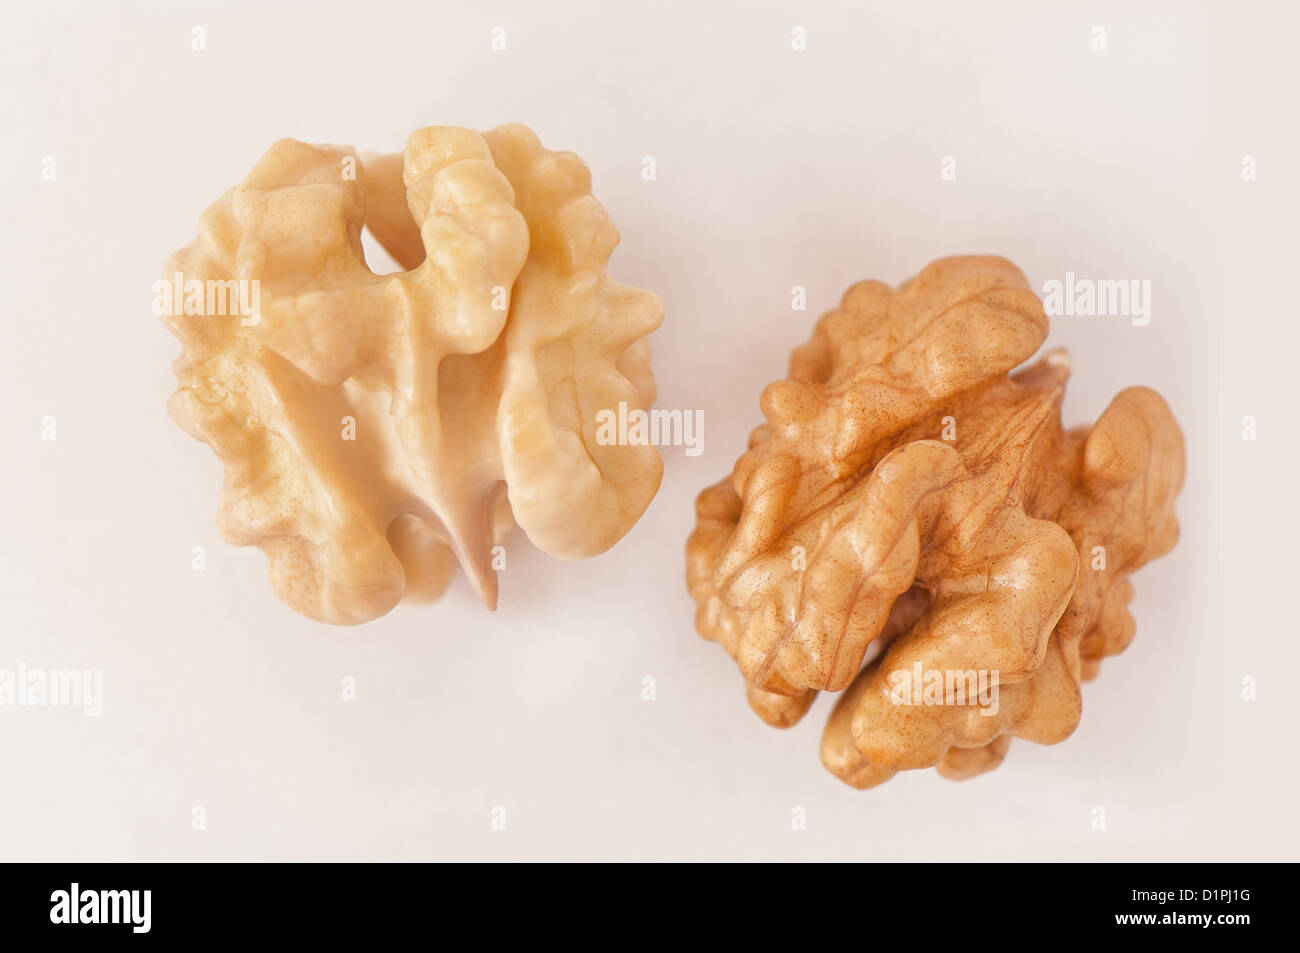 Two isolated walnuts, white and beige Stock Photo